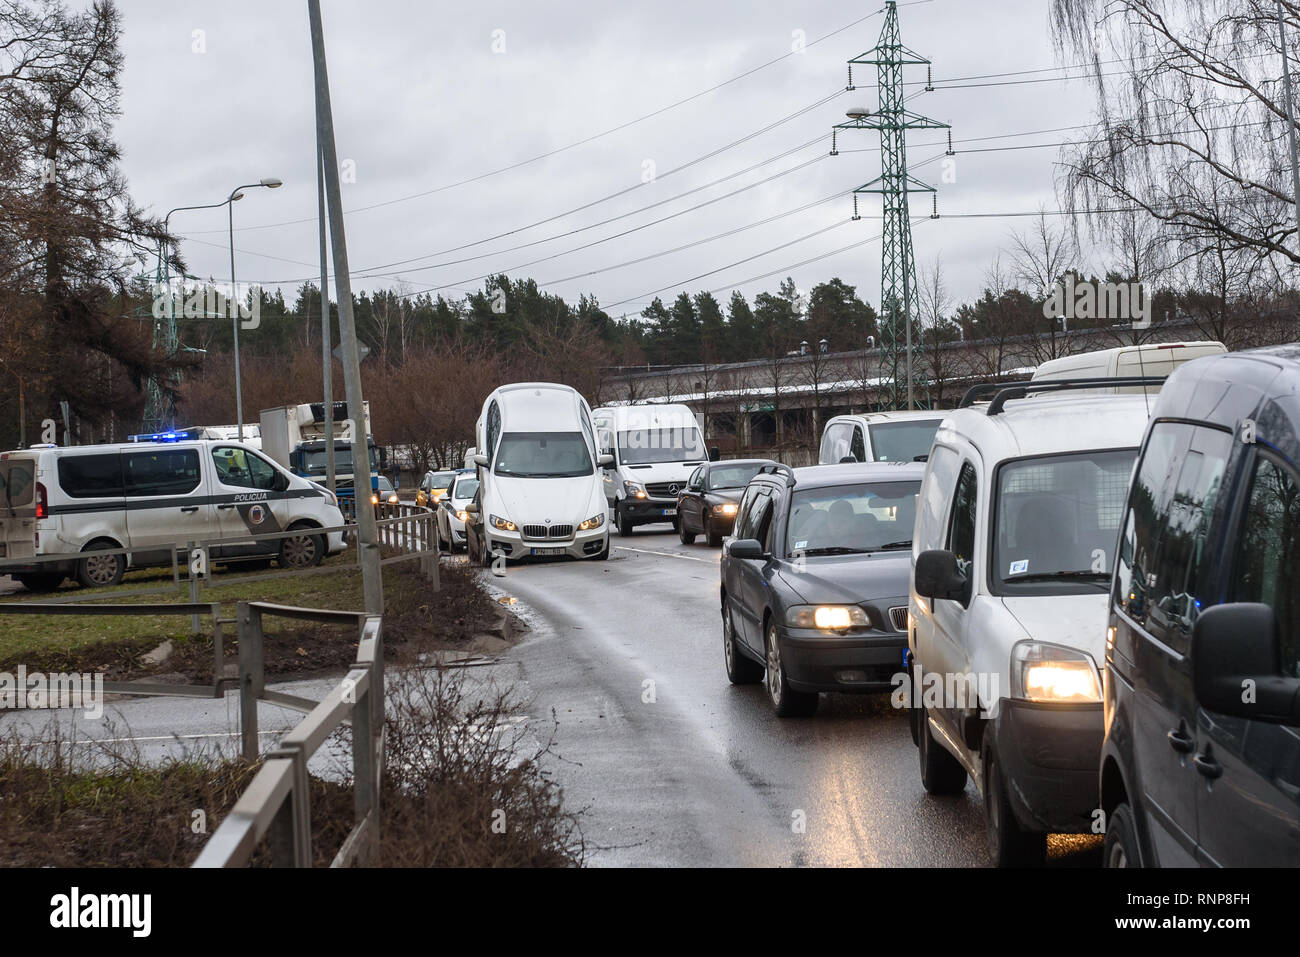 Riga, Latvia. 20th Feb 2019. Car accident - BMW and Hyundai. Strange situation, BMW car is on the roof on Hyundai car. Possibly BMW was a stolen car. Credit: Gints Ivuskans/Alamy Live News Stock Photo